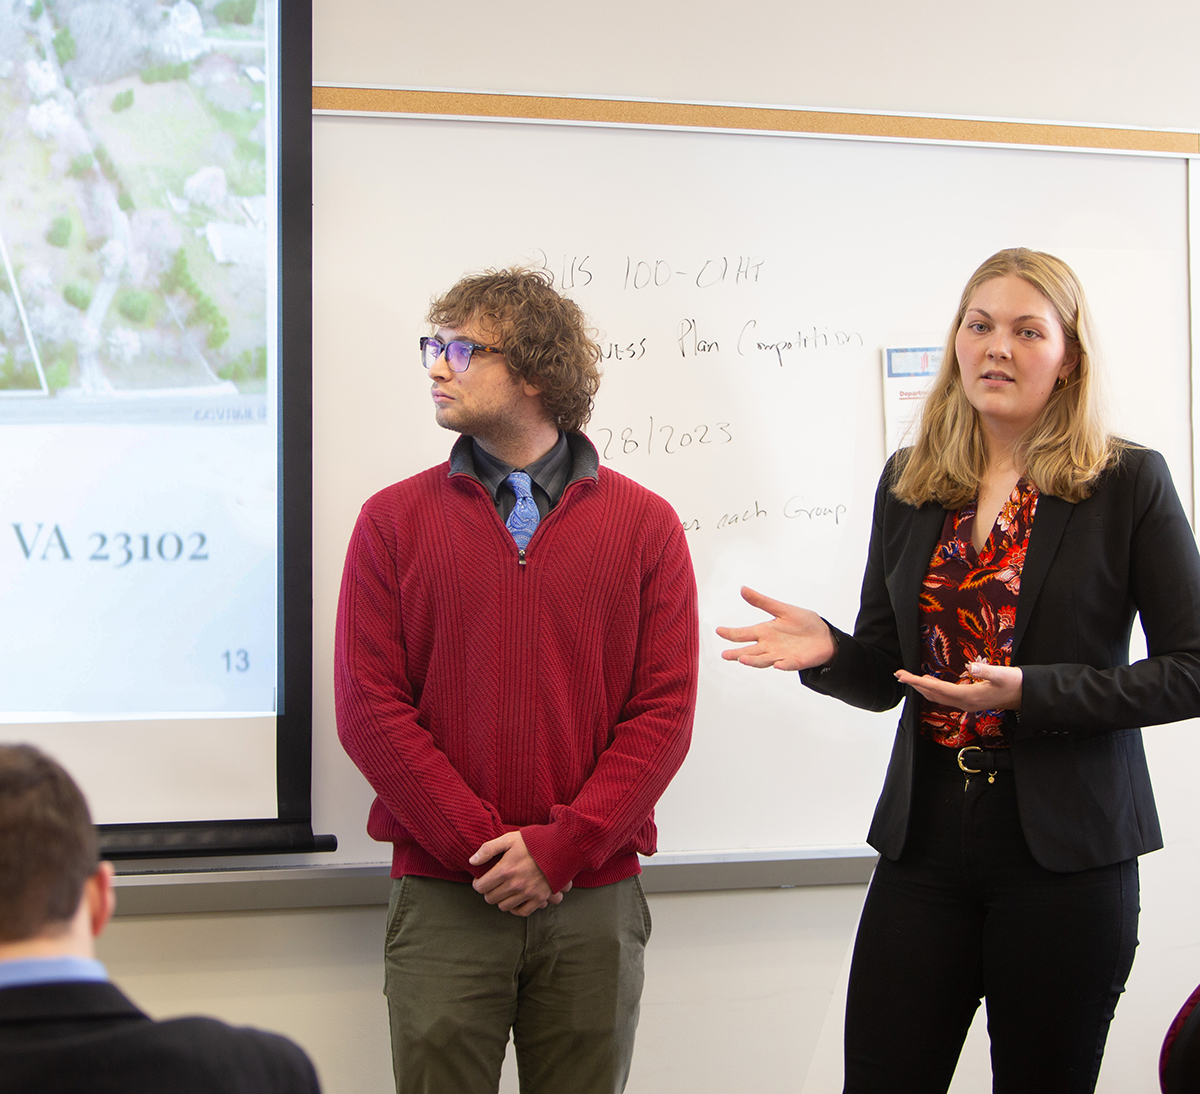 Two students, male in red sweater and female in black pantsuit, stand before the class and pitch their startup business plan